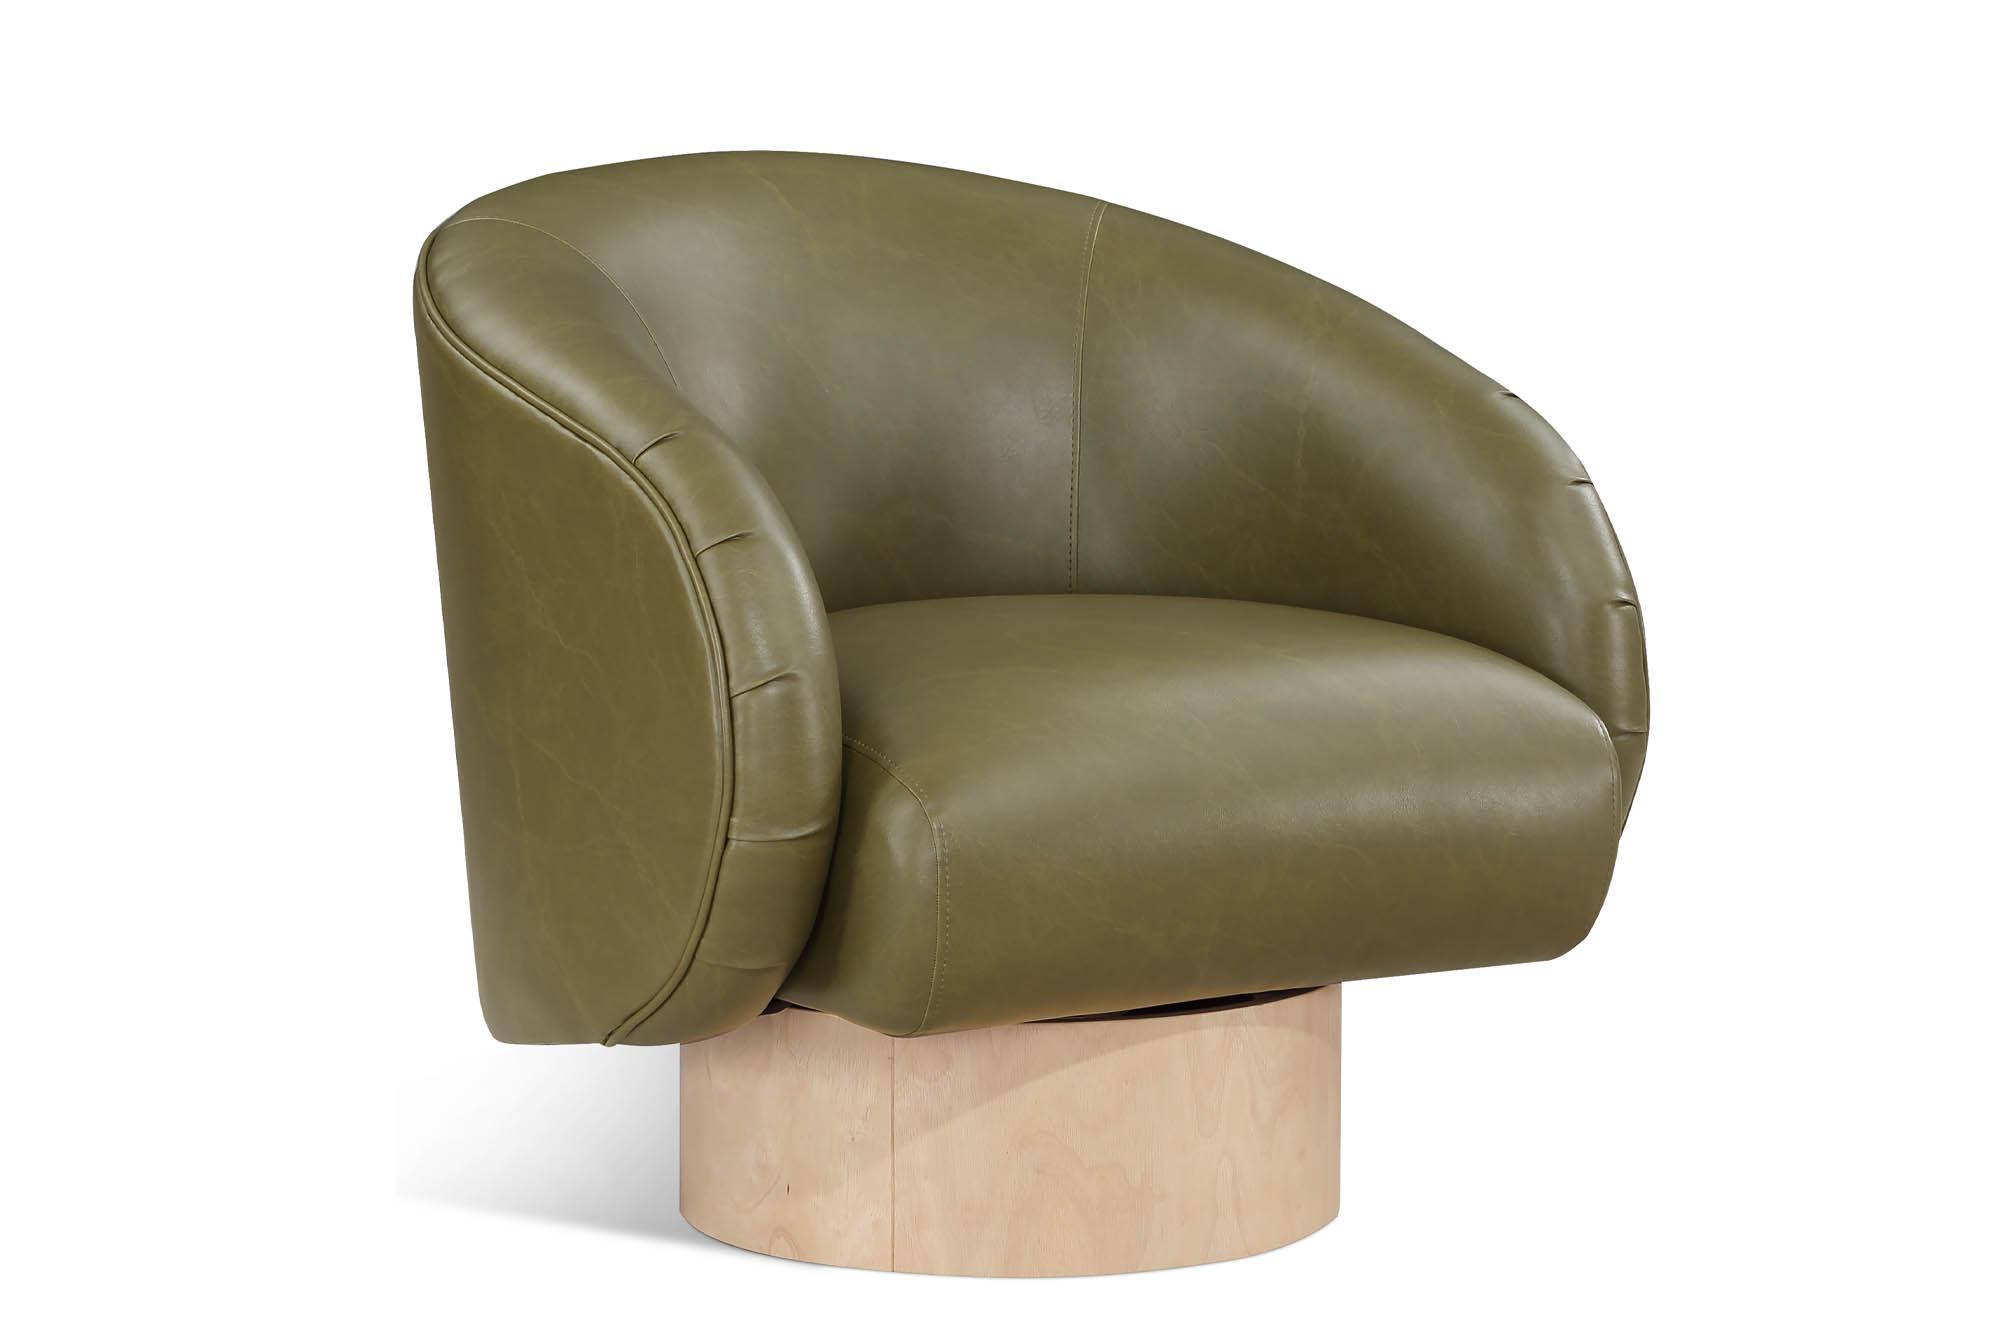 Contemporary, Modern Swivel Chair GIBSON 484Olive 484Olive in Olive Faux Leather